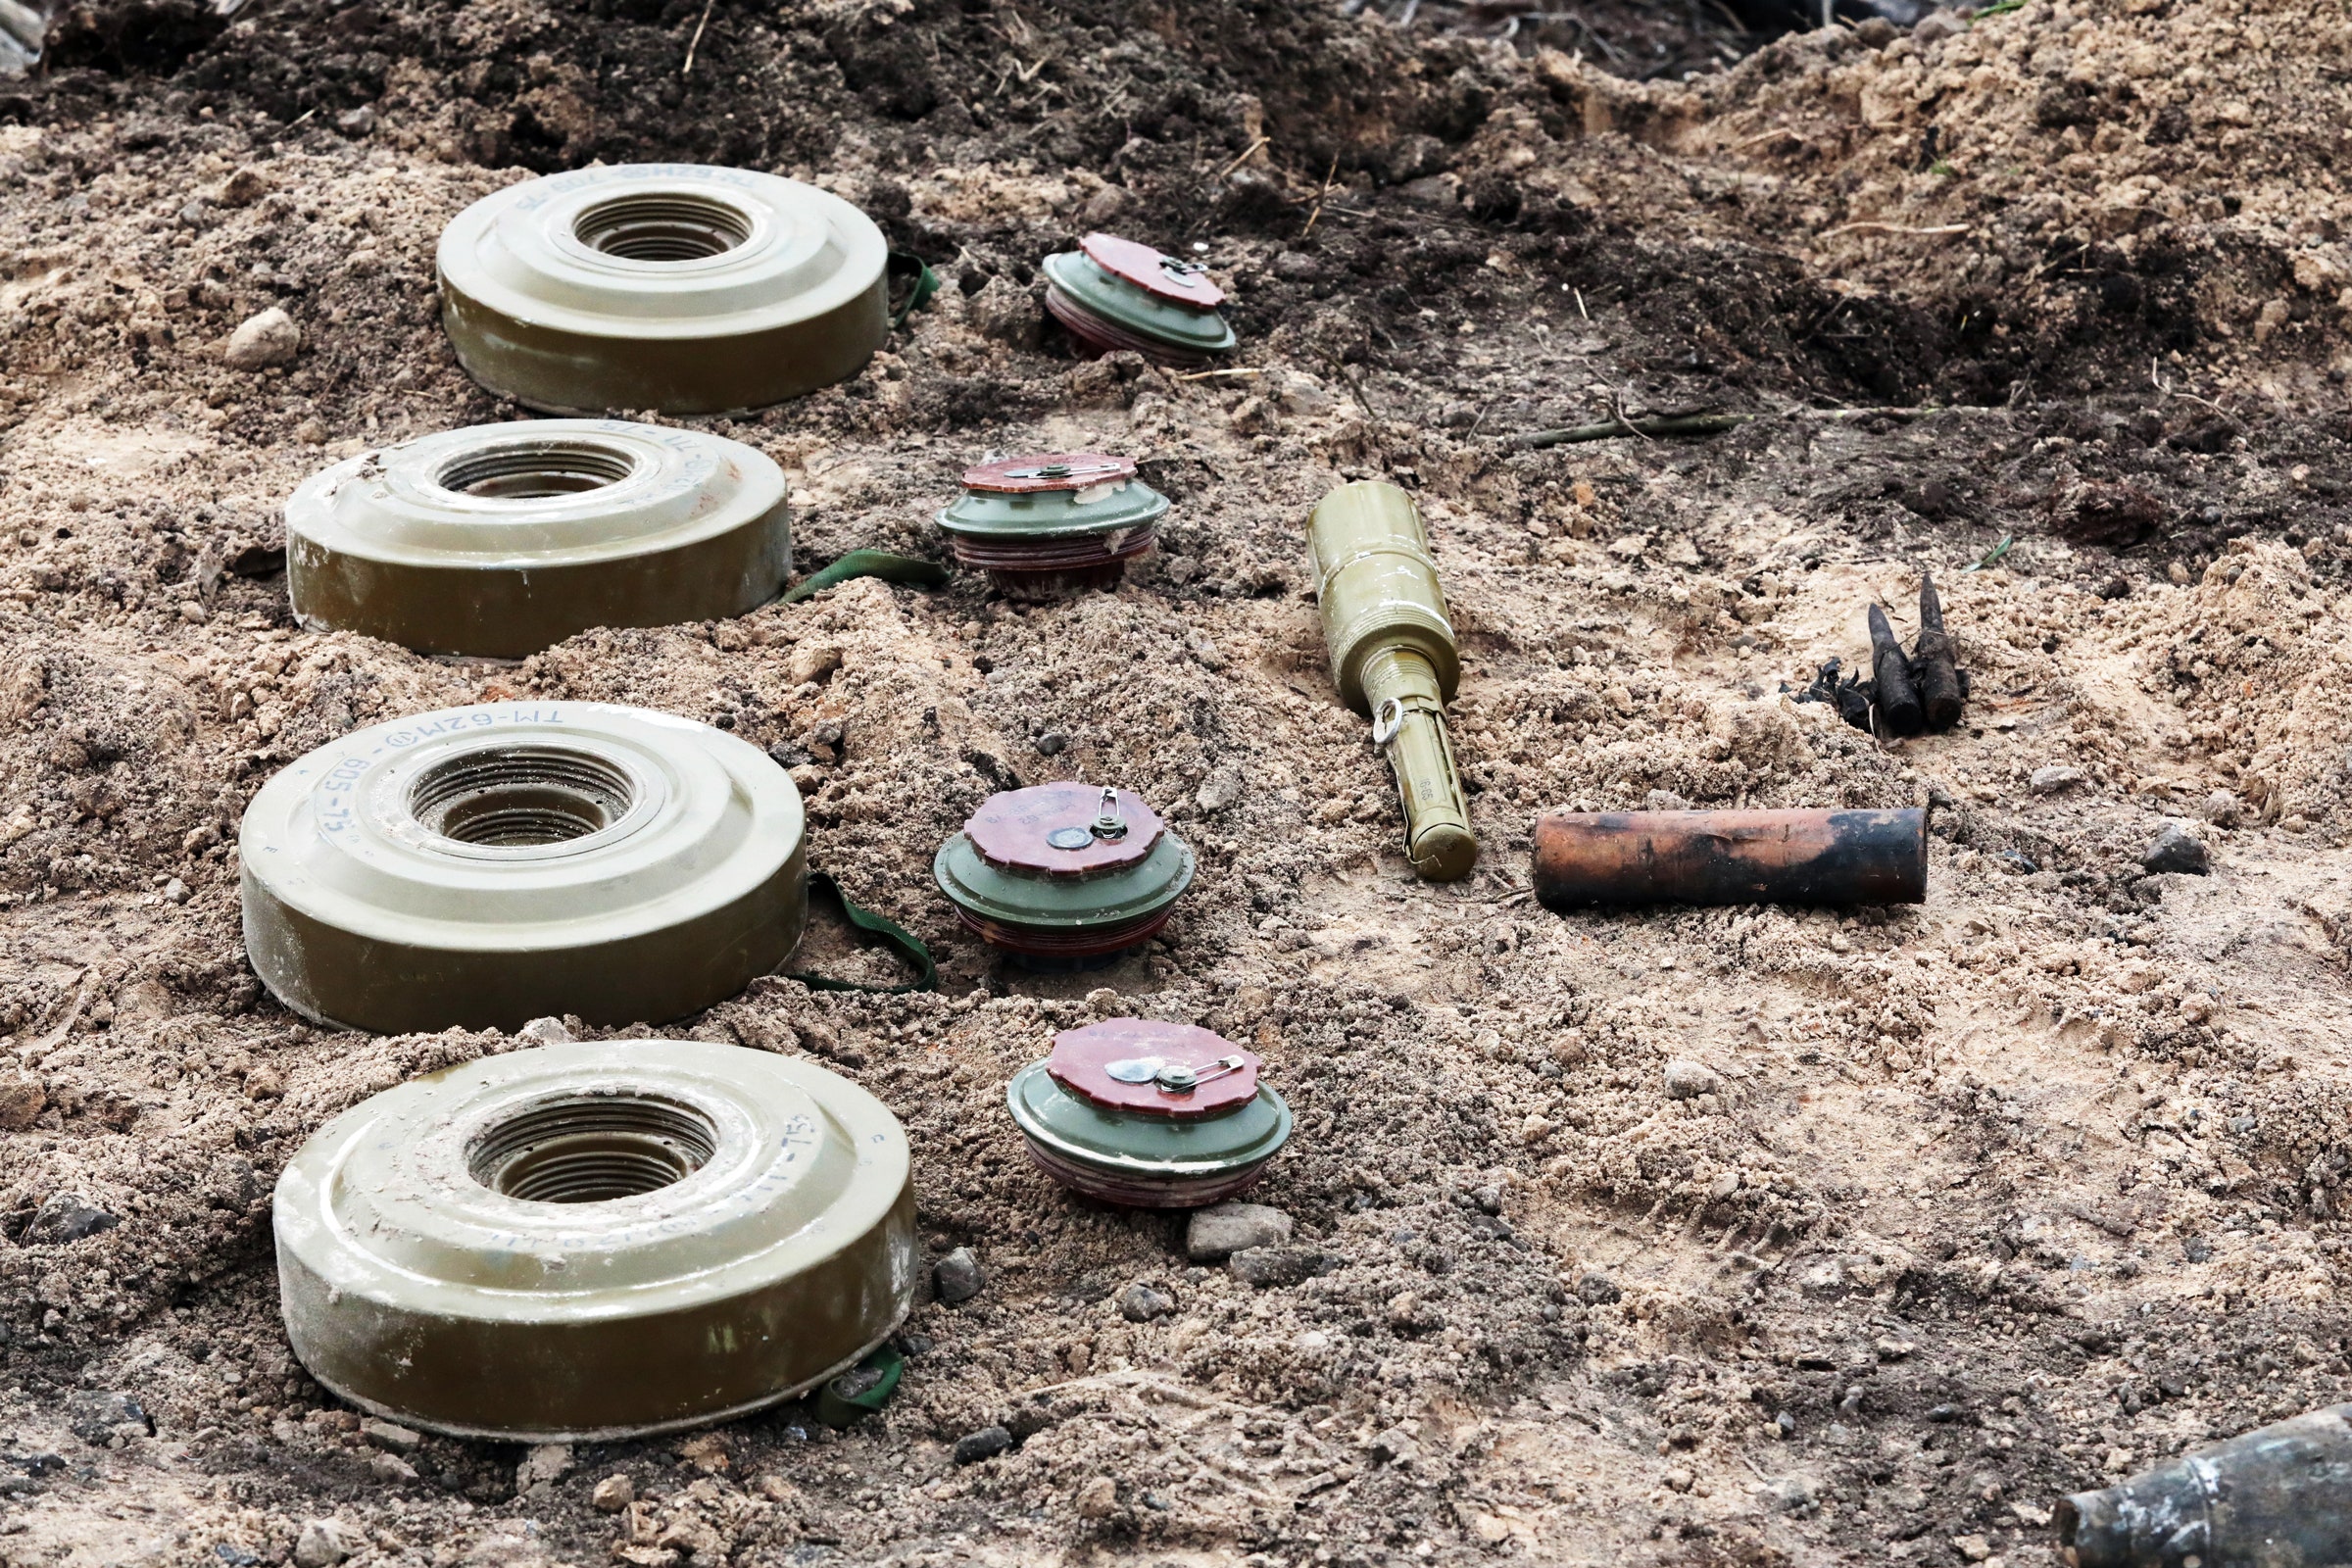 russia-has-turned-eastern-ukraine-into-a-giant-minefield